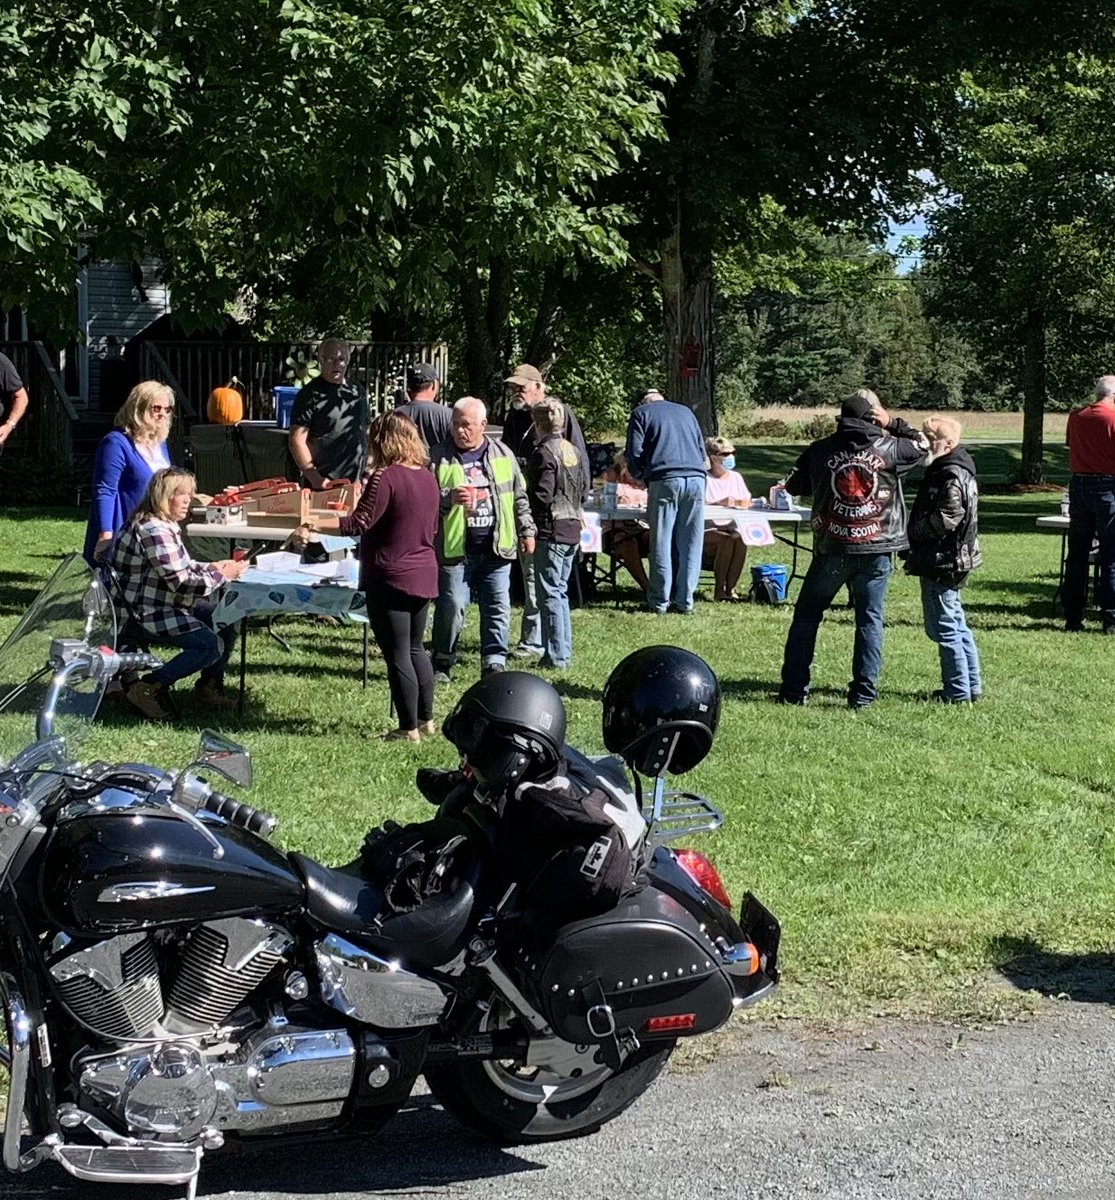 Incredible turnout for the @JDRF_Canada Ride for a Cure.  Thanks to all the amazing volunteers that continue to organize this annual event.  In particular, a big shout out to Leah Sutherland who dedicates so much time, &heart to this event. #nspoli #Pictouwest